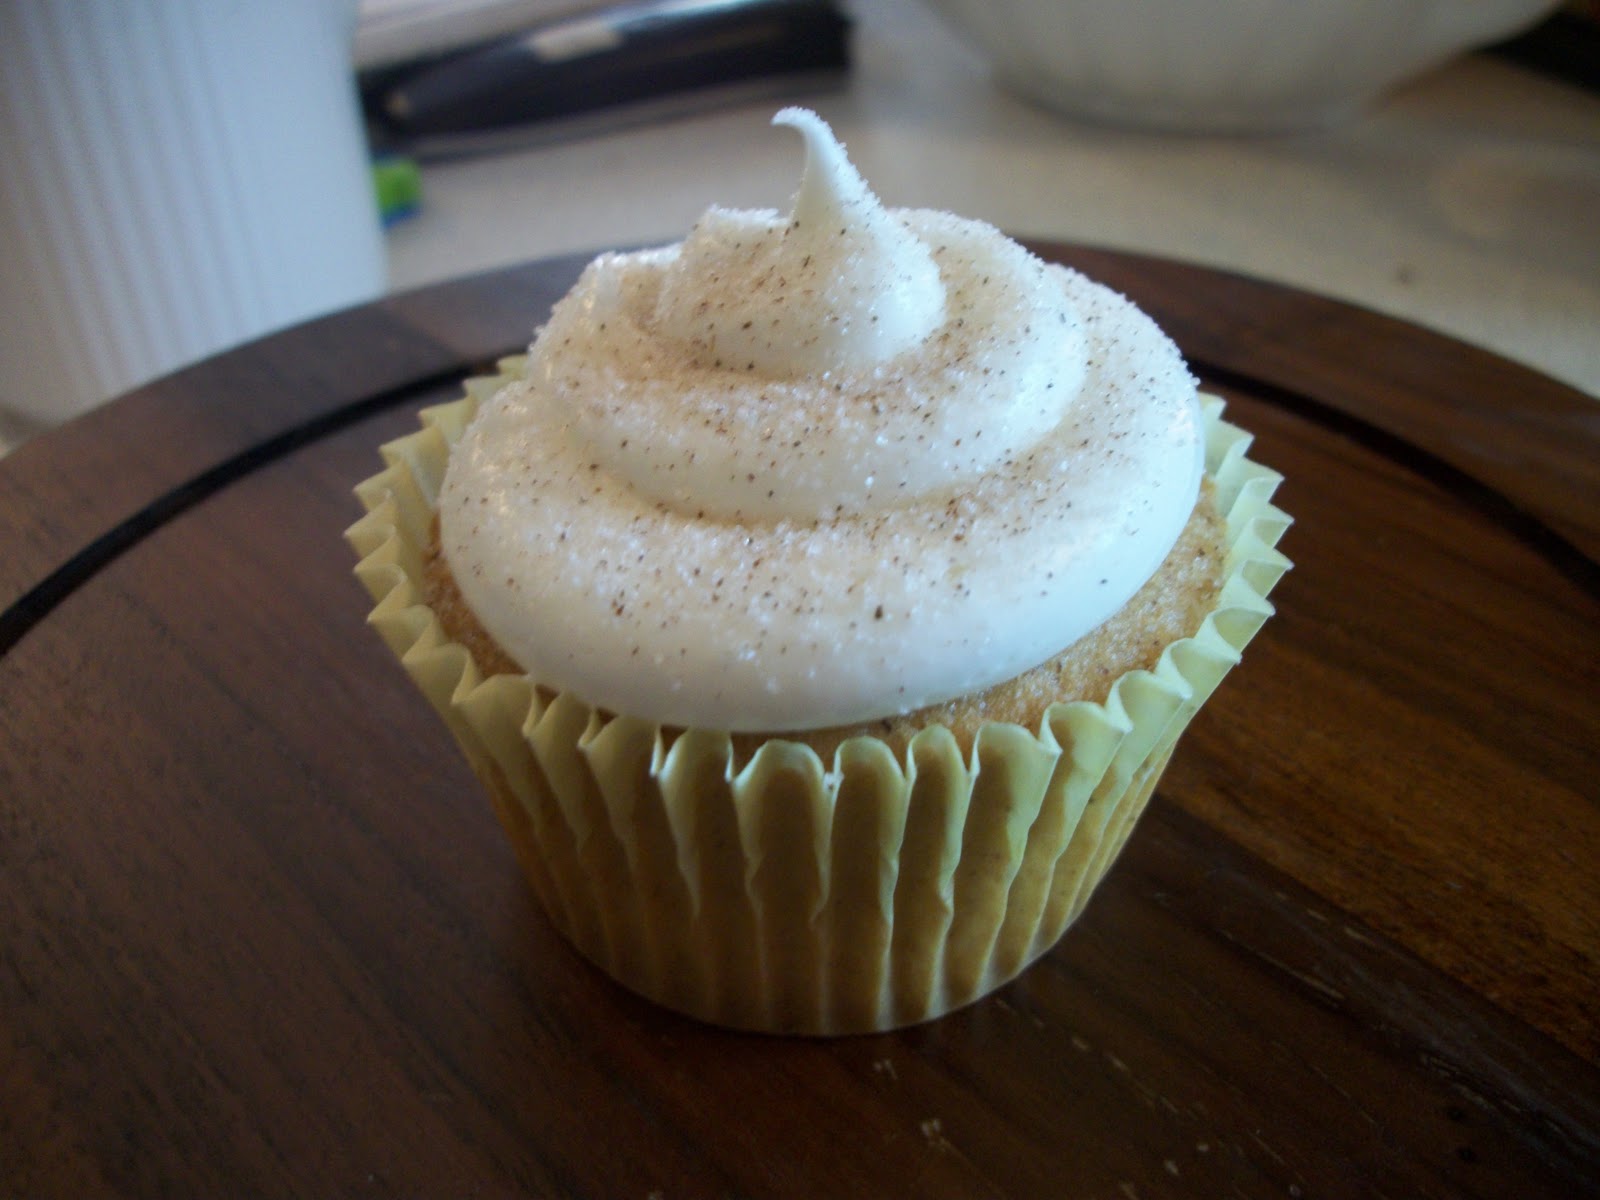 Brown Sugar Cinnamon Cupcakes with Frosting